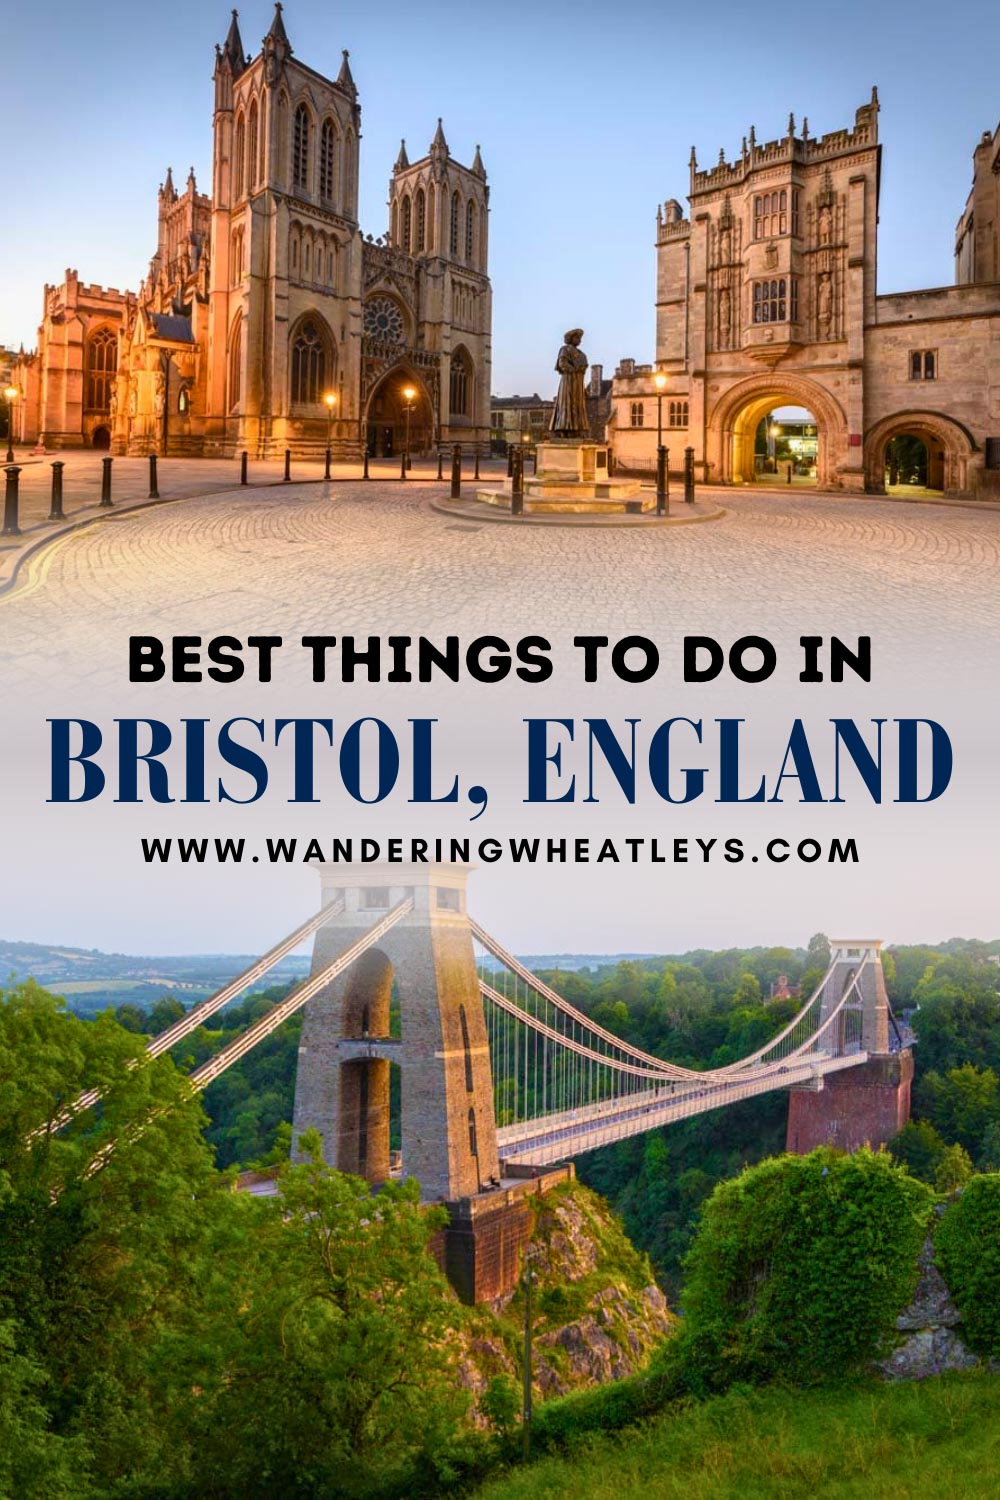 10 things you should know before moving to Bristol ‹ GO Blog